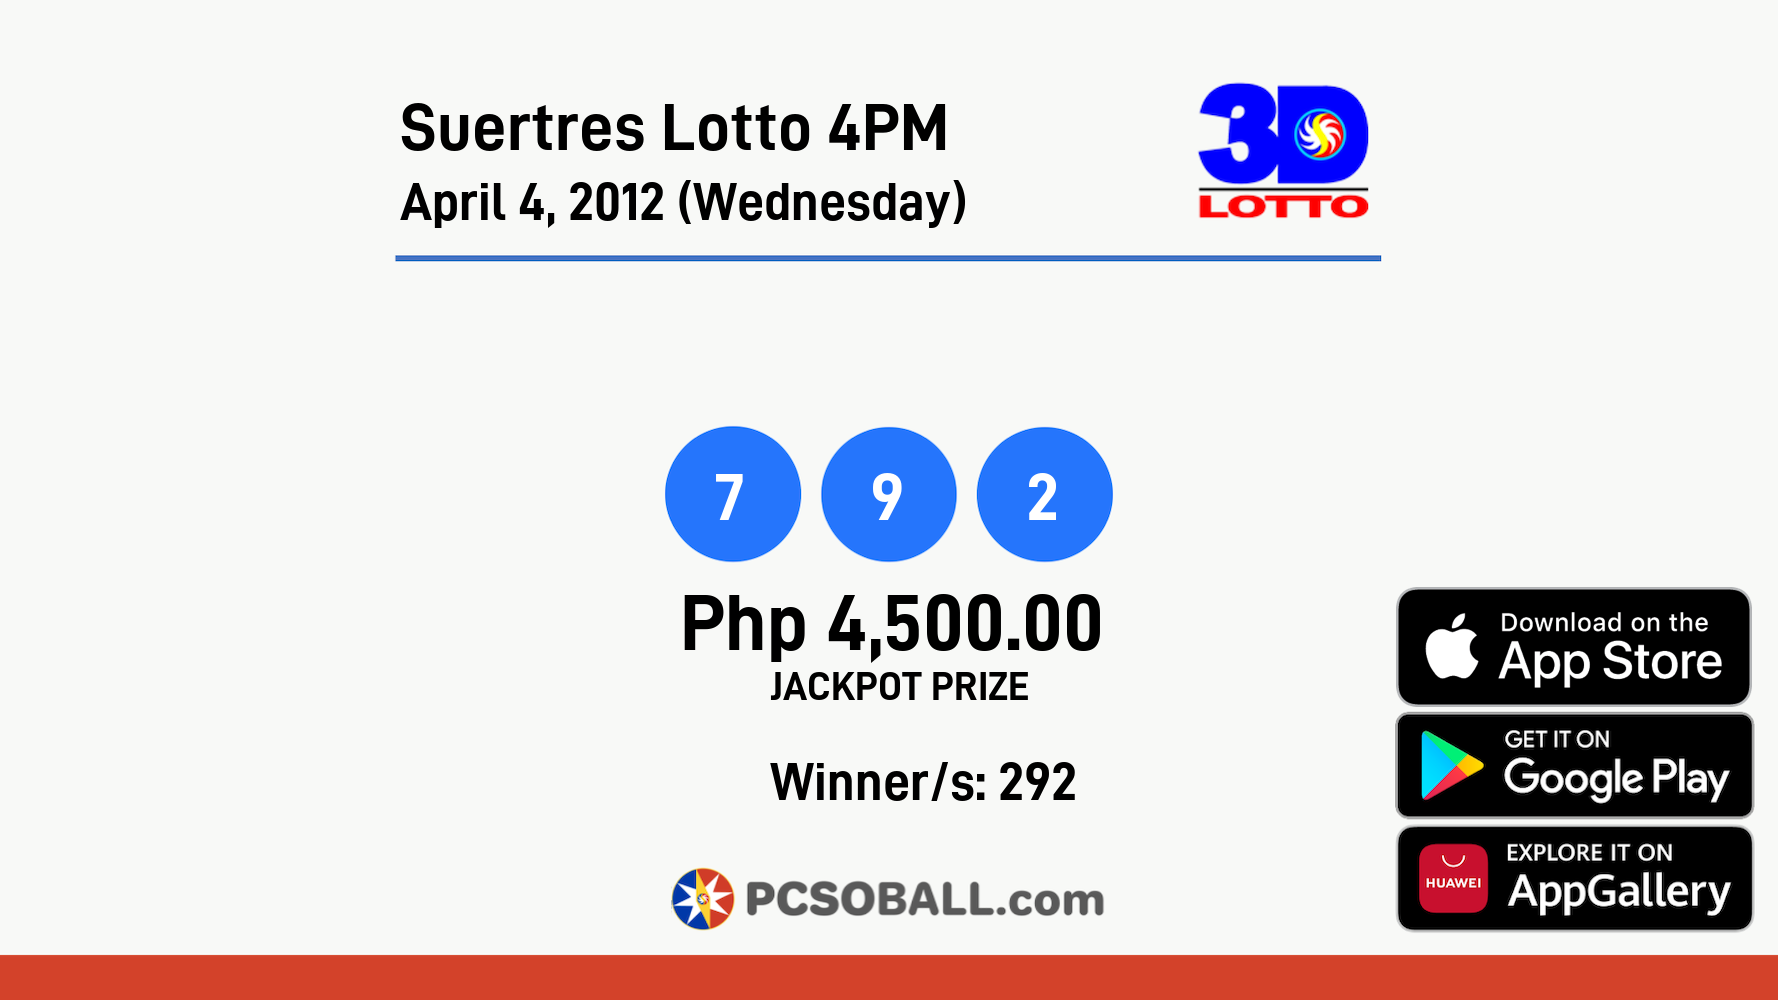 Suertres Lotto 4PM April 4, 2012 (Wednesday) Result